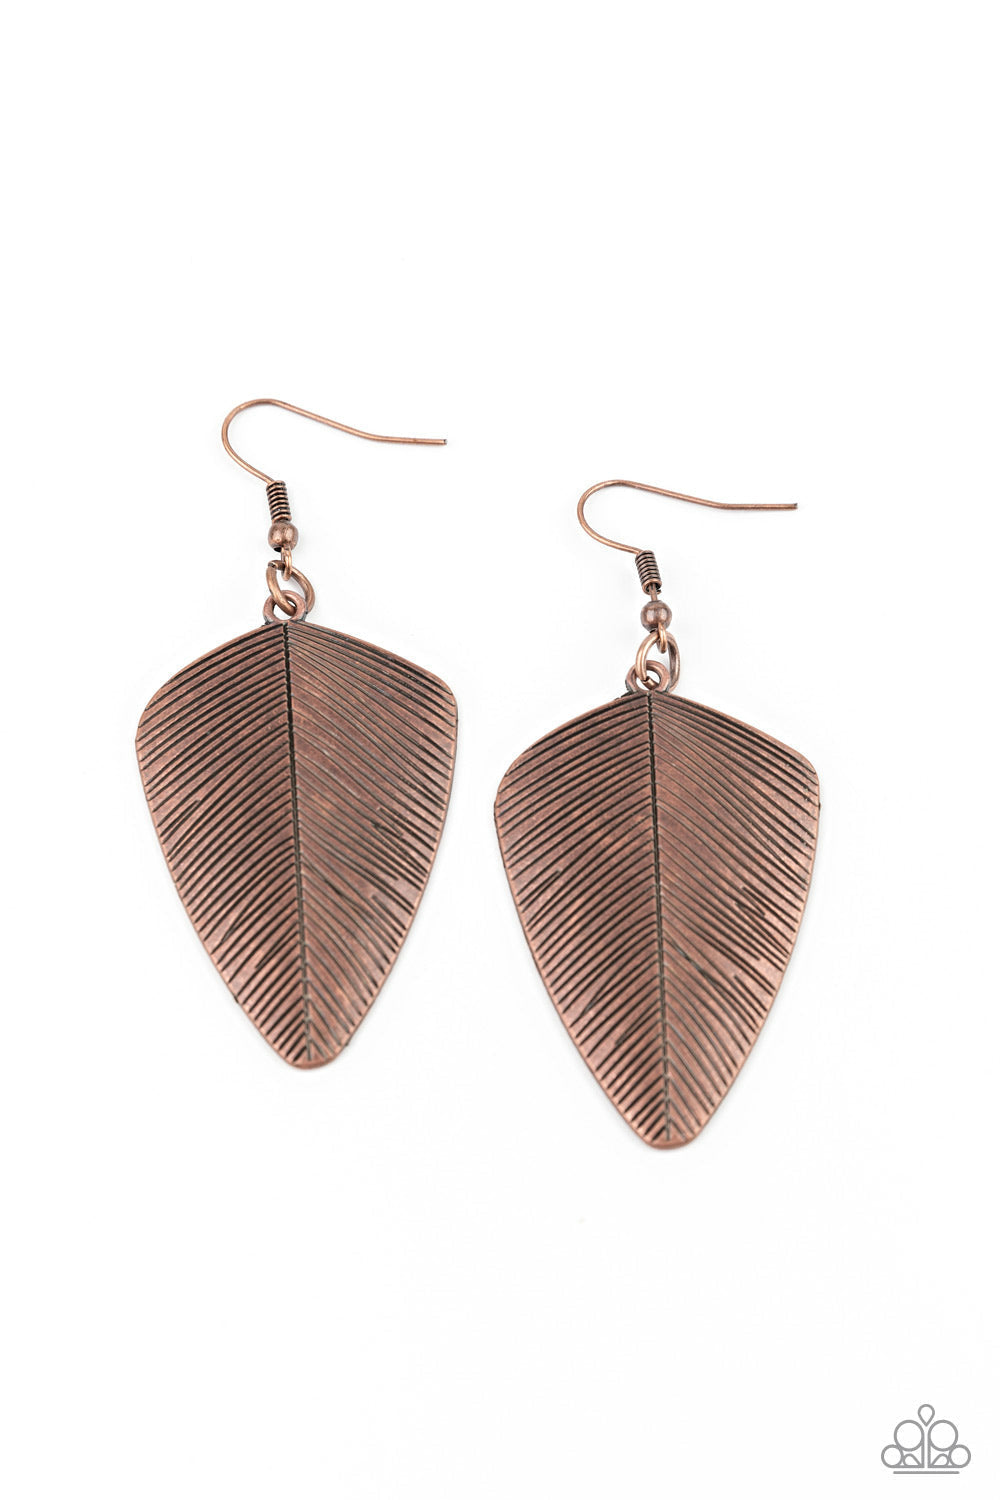 One Of The Flock - Copper Feather Earrings - Paparazzi Jewelry  - Bejeweled Accessories By Kristie - Stamped in antiqued details, a dainty copper feather delicately swings from the ear for a rustic look. Earring attaches to a standard fishhook fitting earrings.